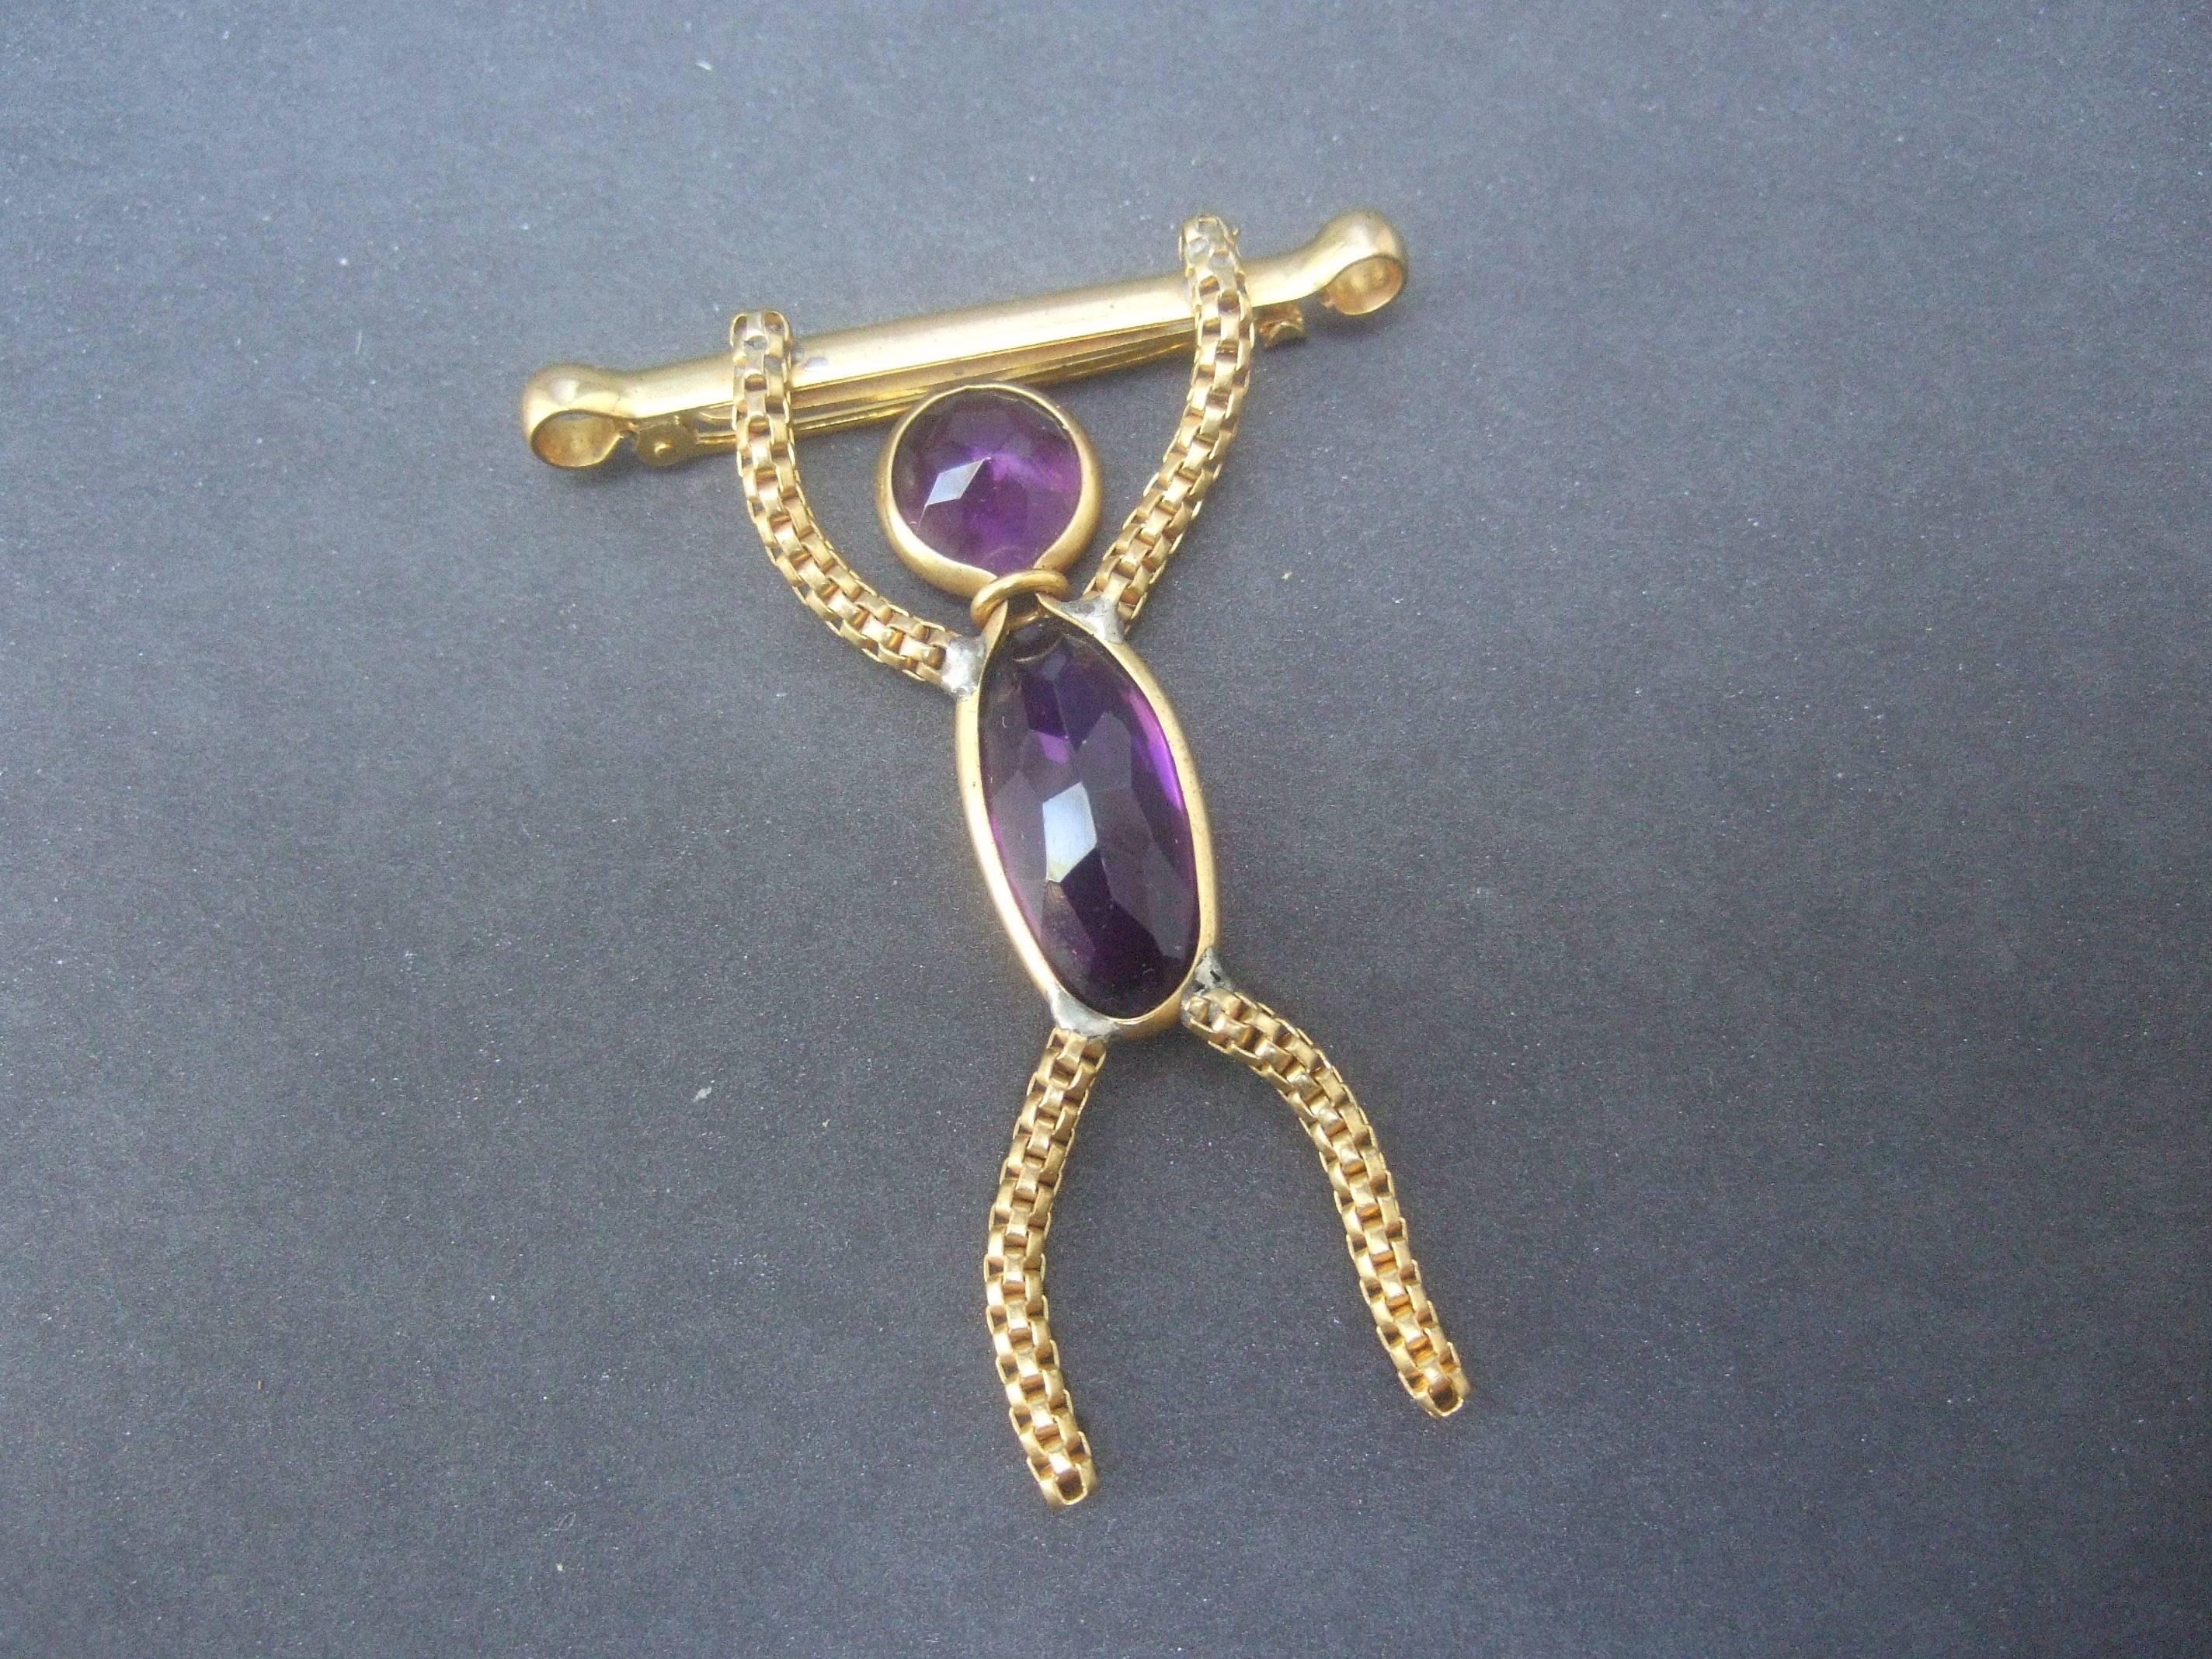 Whimsical figural hang man crystal brooch c 1960
The unique figural brooch is designed with an
andrognous figure that may be a man or monkey
figure suspended from a gilt metal bar 

The figure is embellished with an elongated 
amethyst color crystal